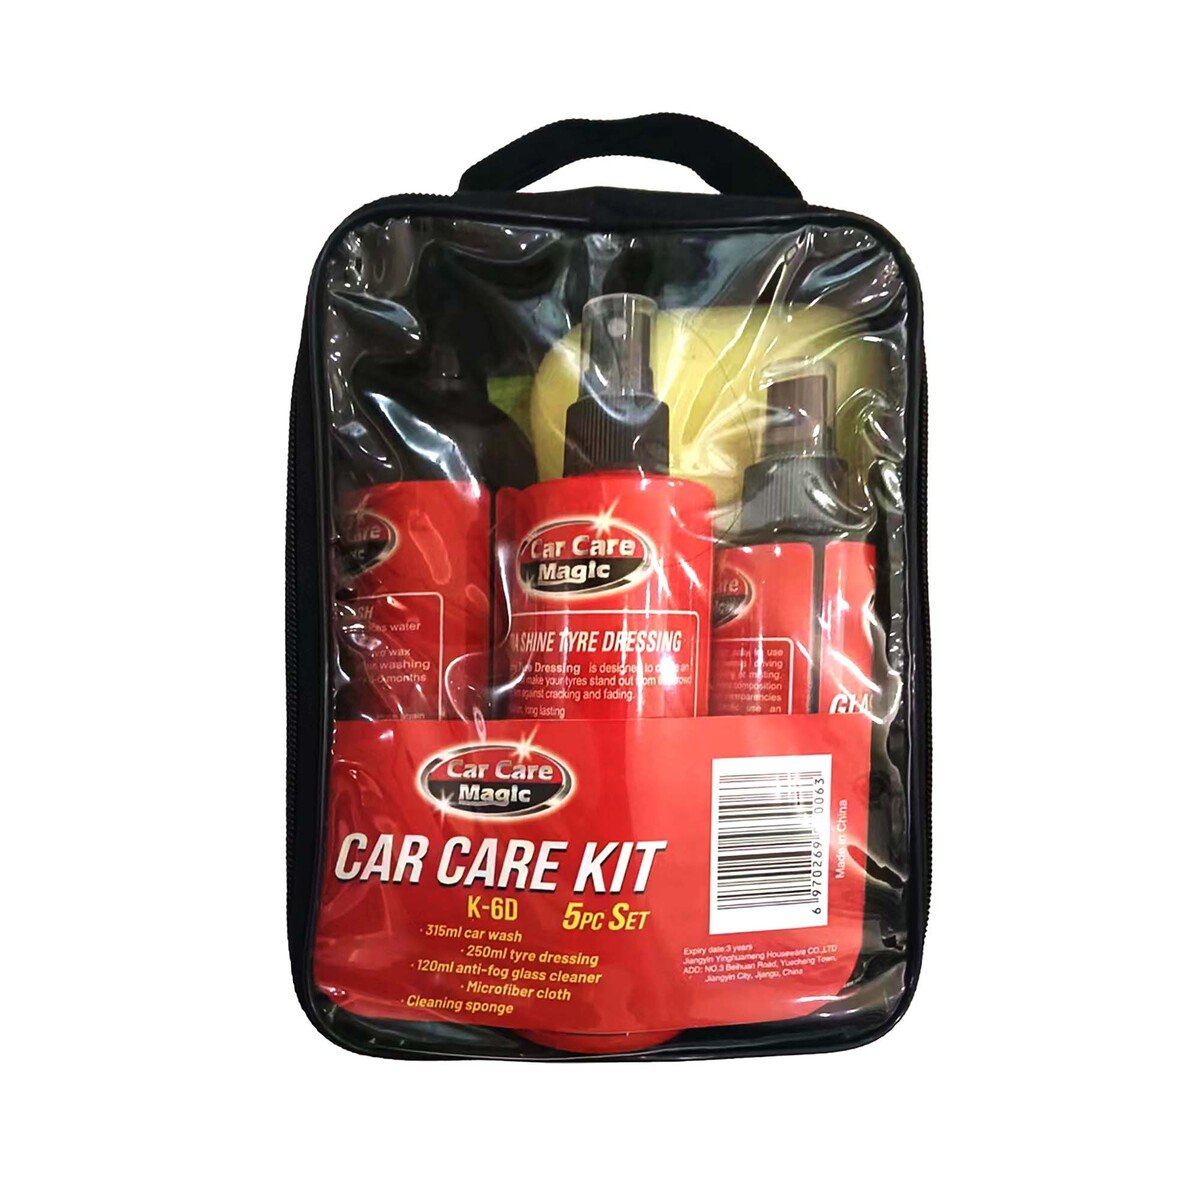 SYGA Car Cleaner Kit with 8 Different Tools for Car Cleaning Combo Price in  India - Buy SYGA Car Cleaner Kit with 8 Different Tools for Car Cleaning  Combo online at